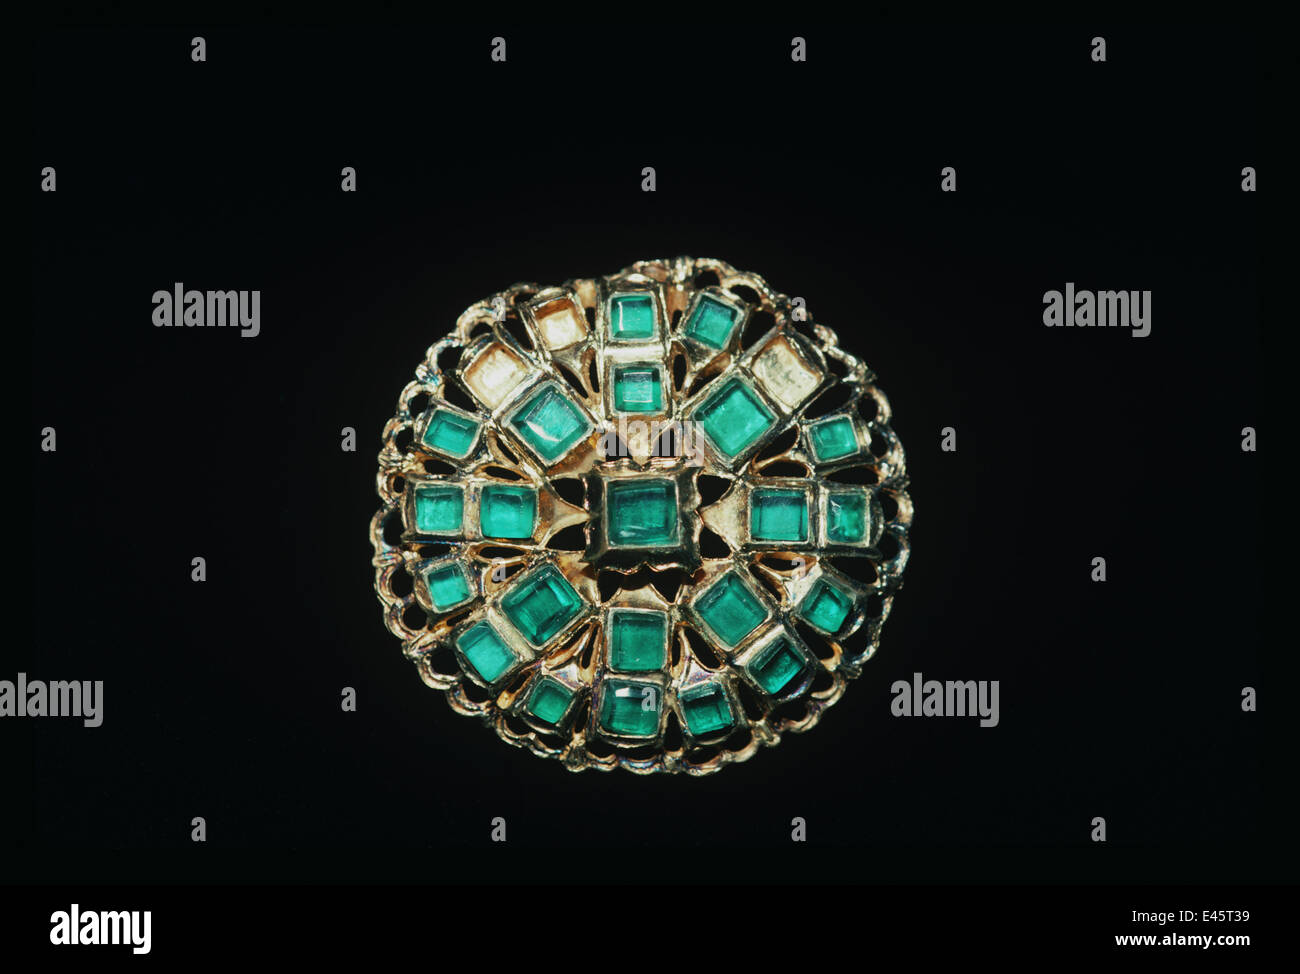 Emerald brooch recovered from the shipwreck 'Las Maravillas', a Spanish galleon sunk in 1658, Bahamas. 1987. Stock Photo